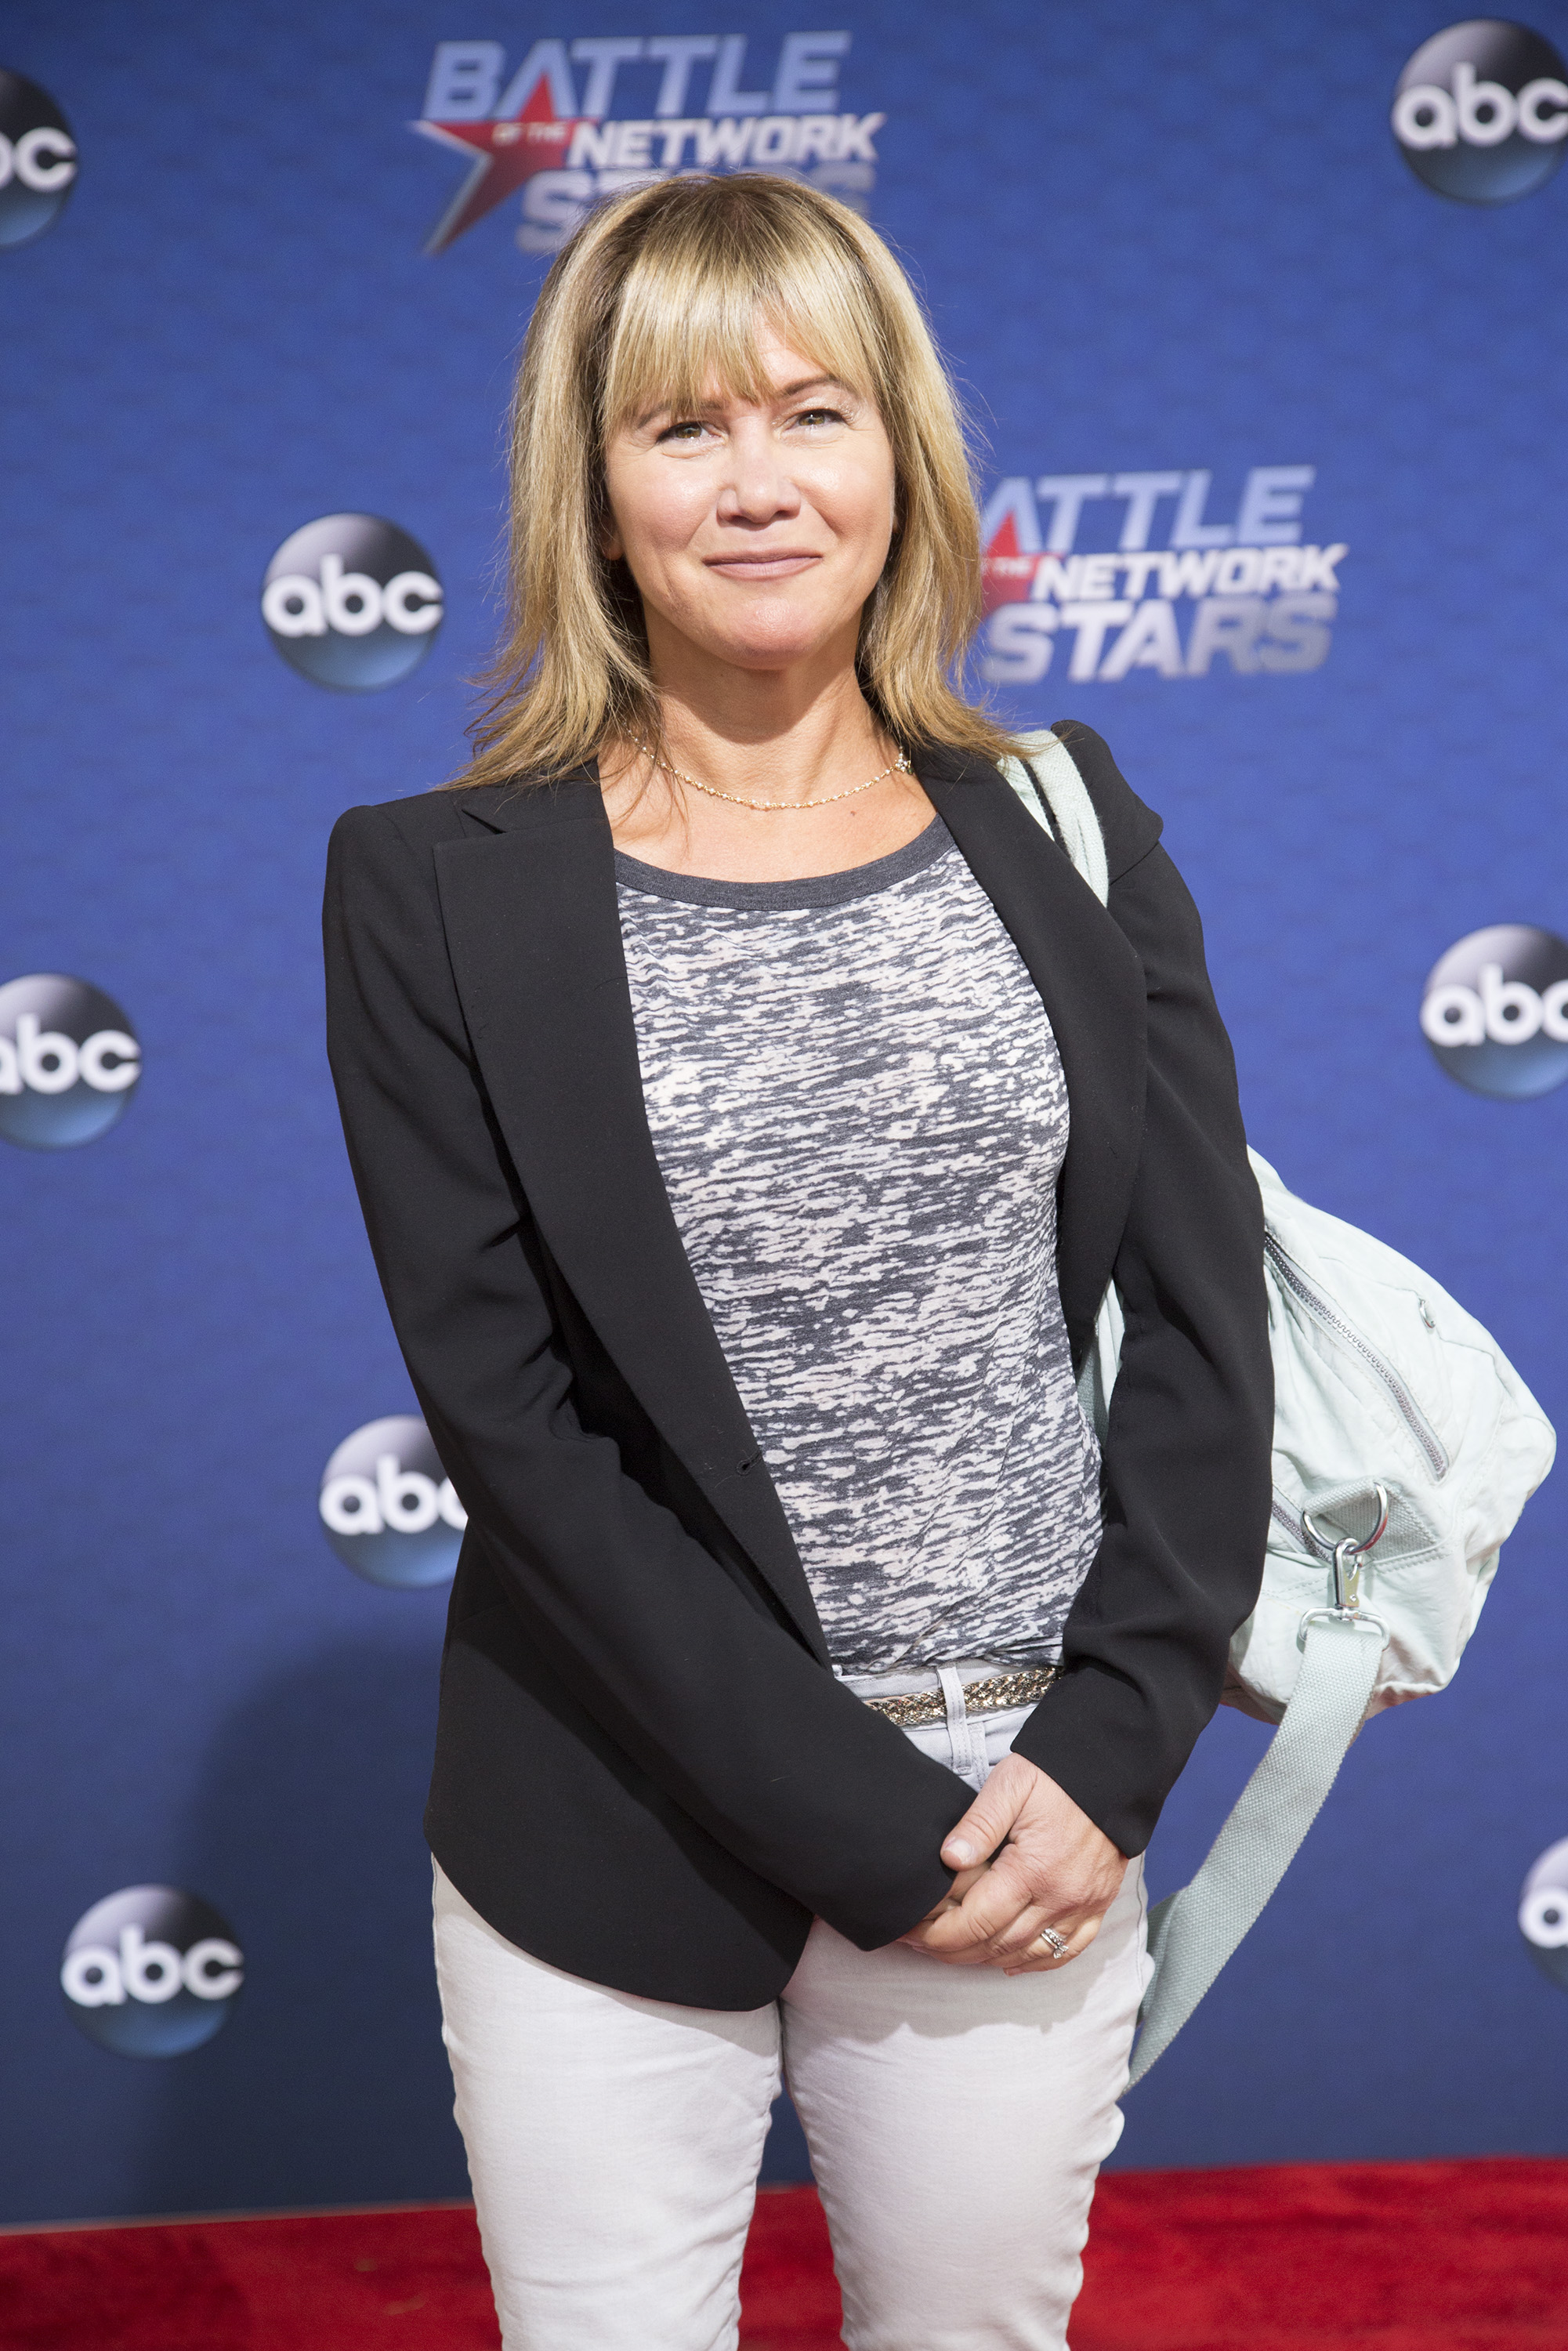 Tracey Gold at a "Battle of the Network Stars" event on June 12, 2017. | Source: Getty Images